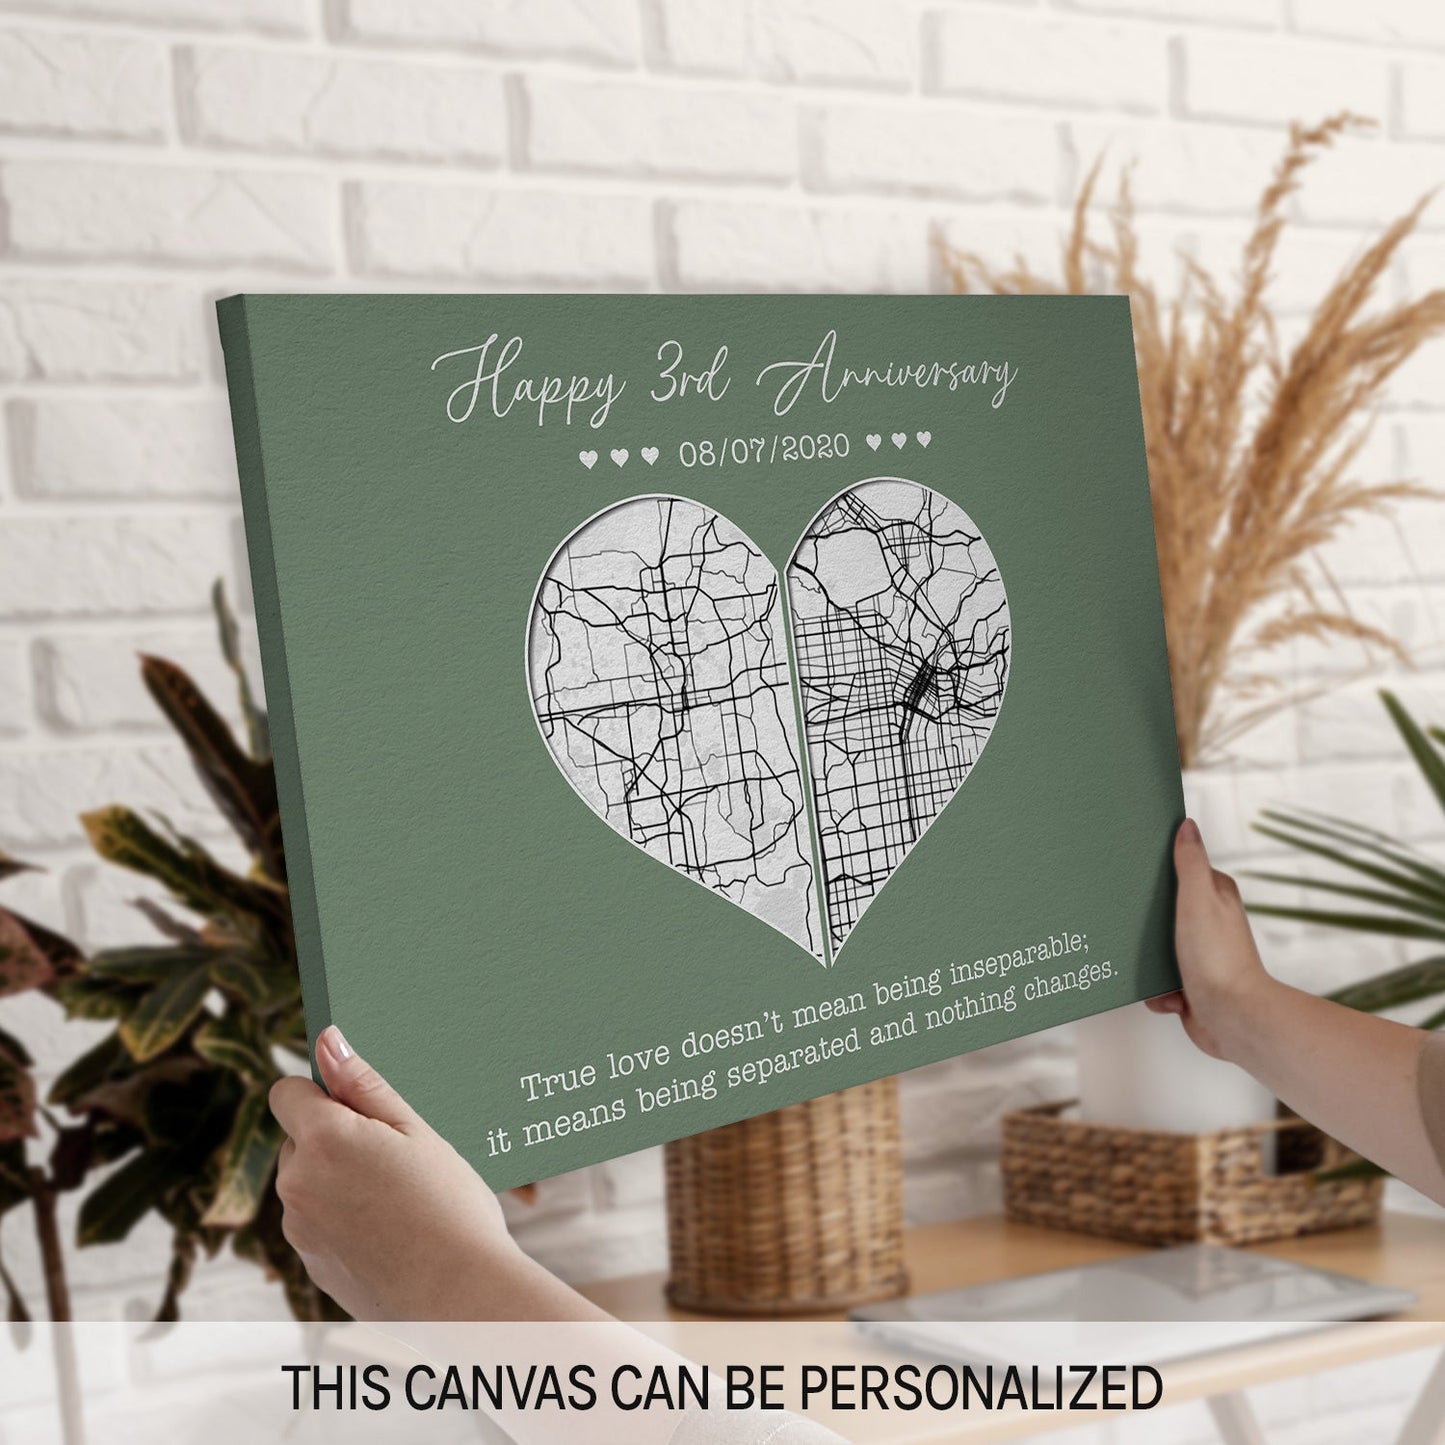 Three Year Anniversary True Love Doesn't Mean Being Inseparable - Personalized 3 Year Anniversary gift for him for her - Custom Canvas - MyMindfulGifts